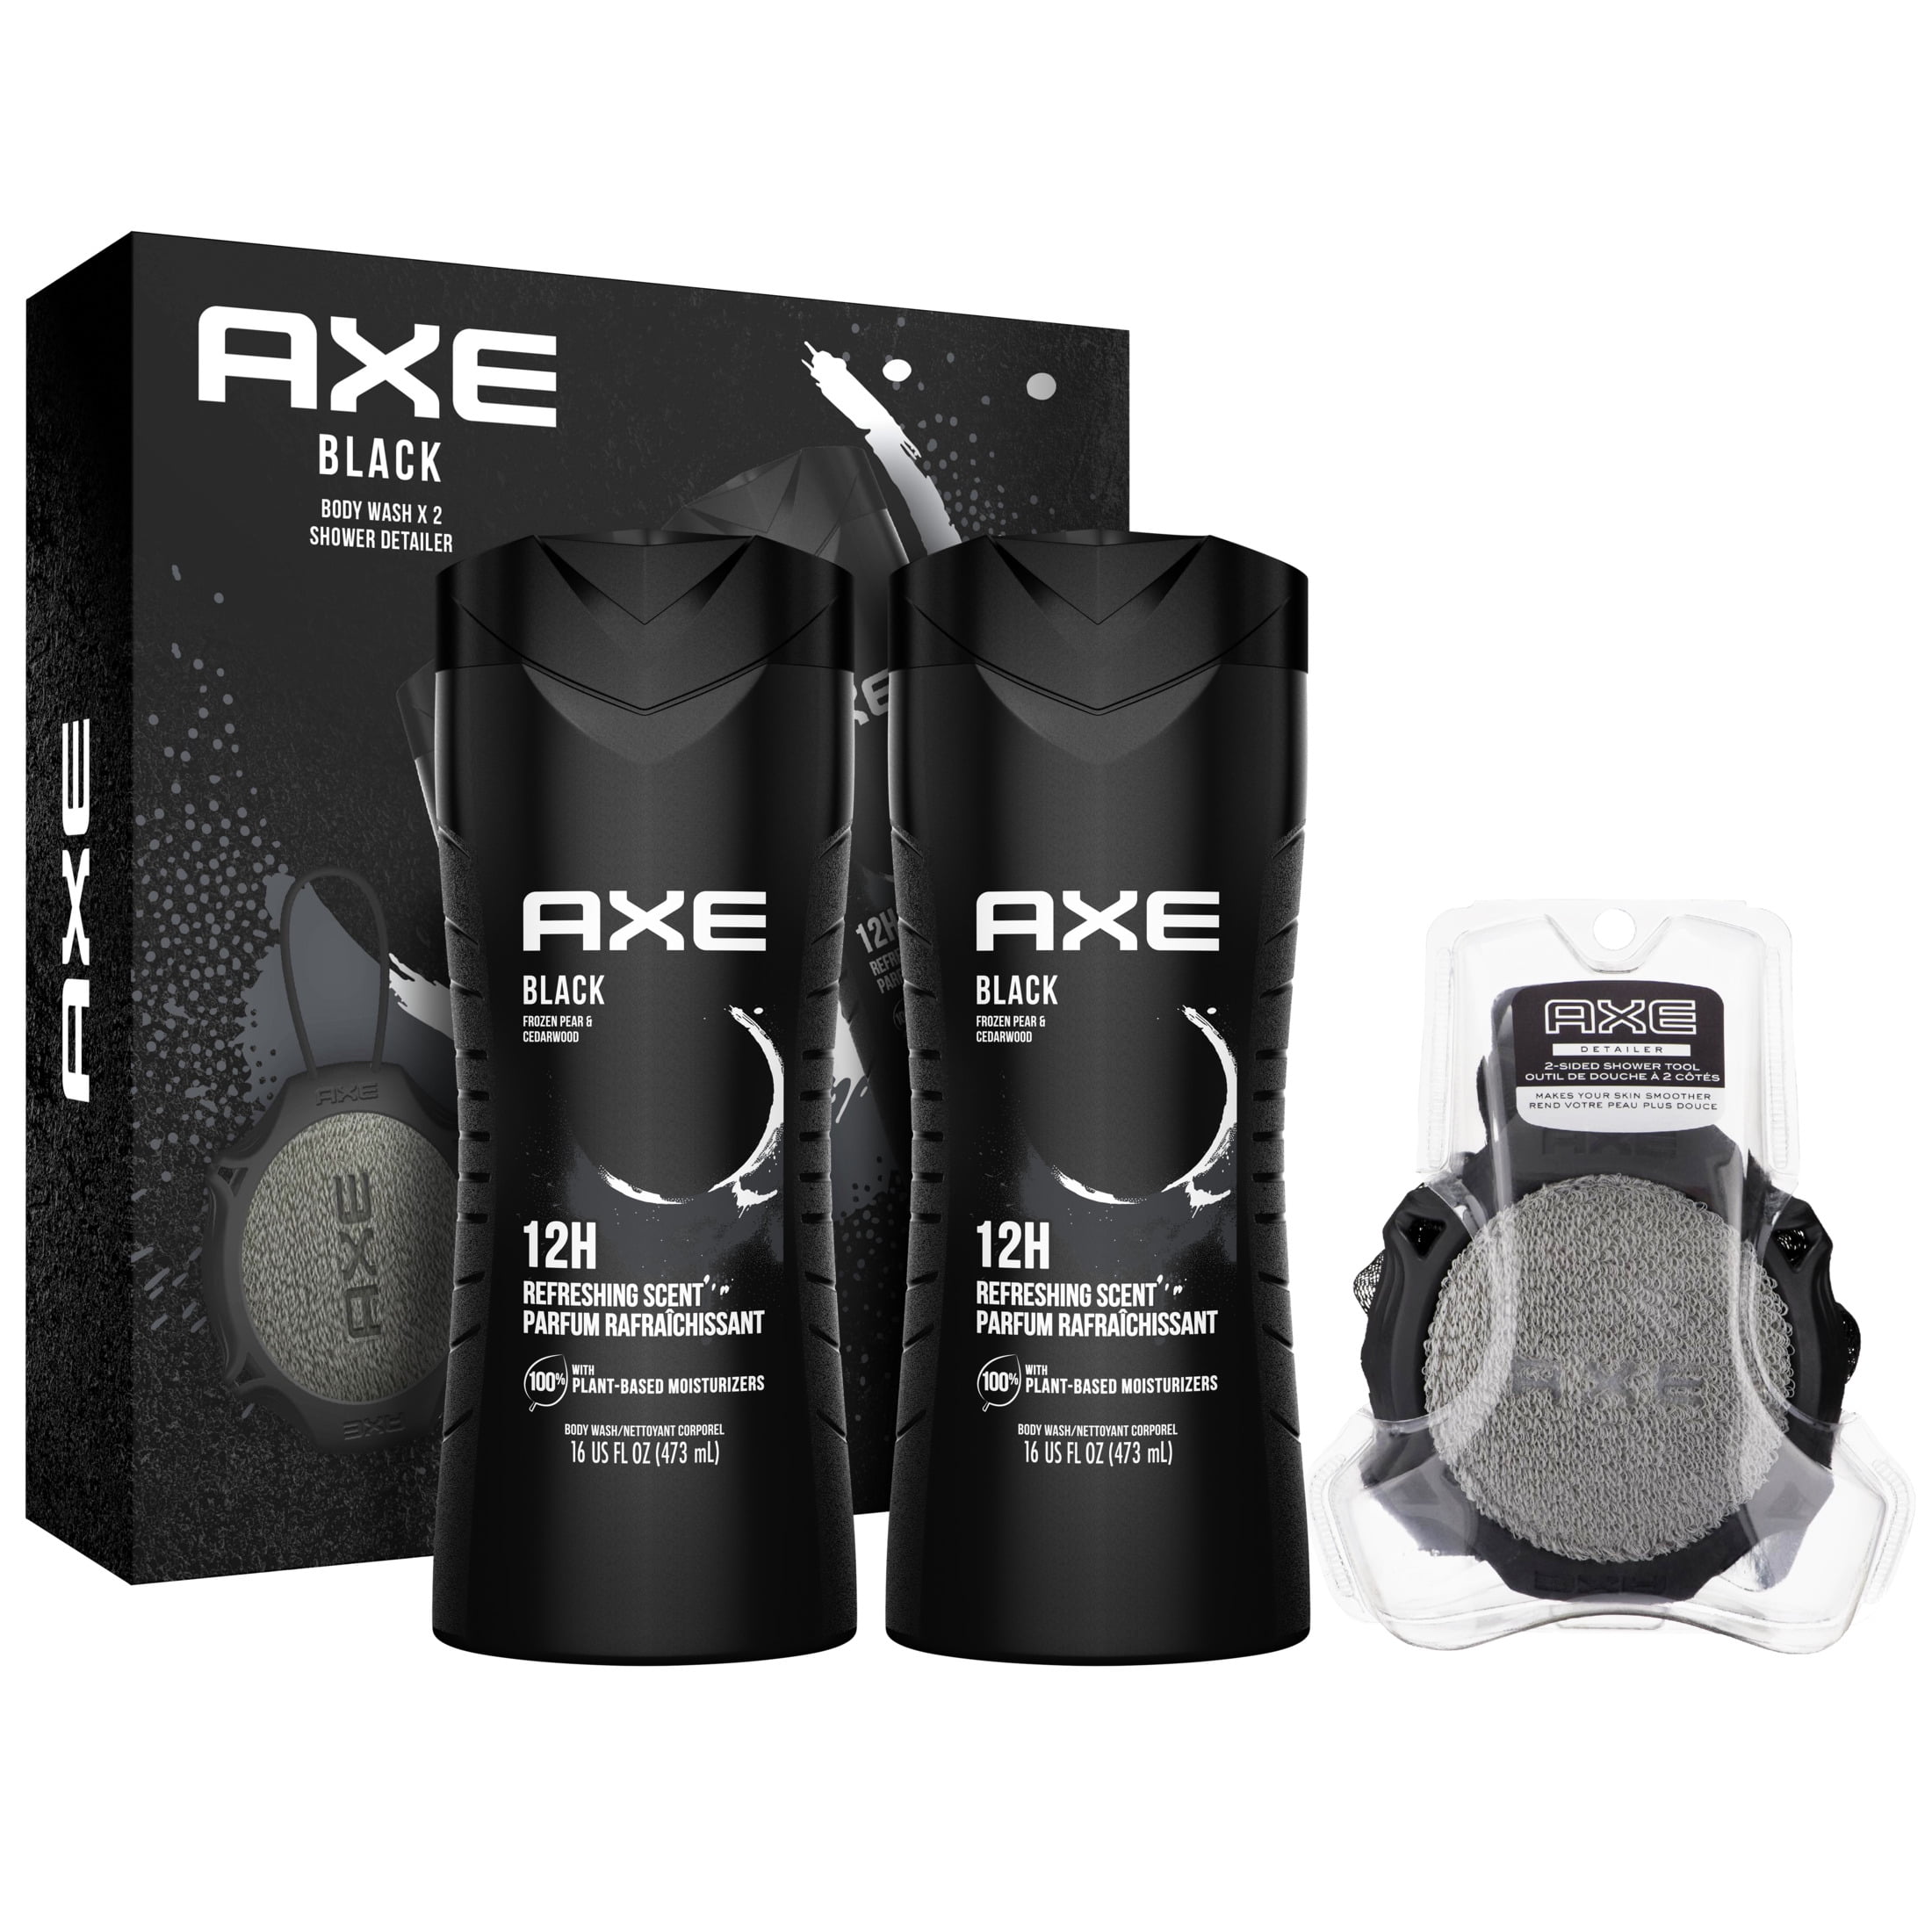 ($14 VALUE) AXE Black Body Wash Gift Set With Shower Tool, 3 Count